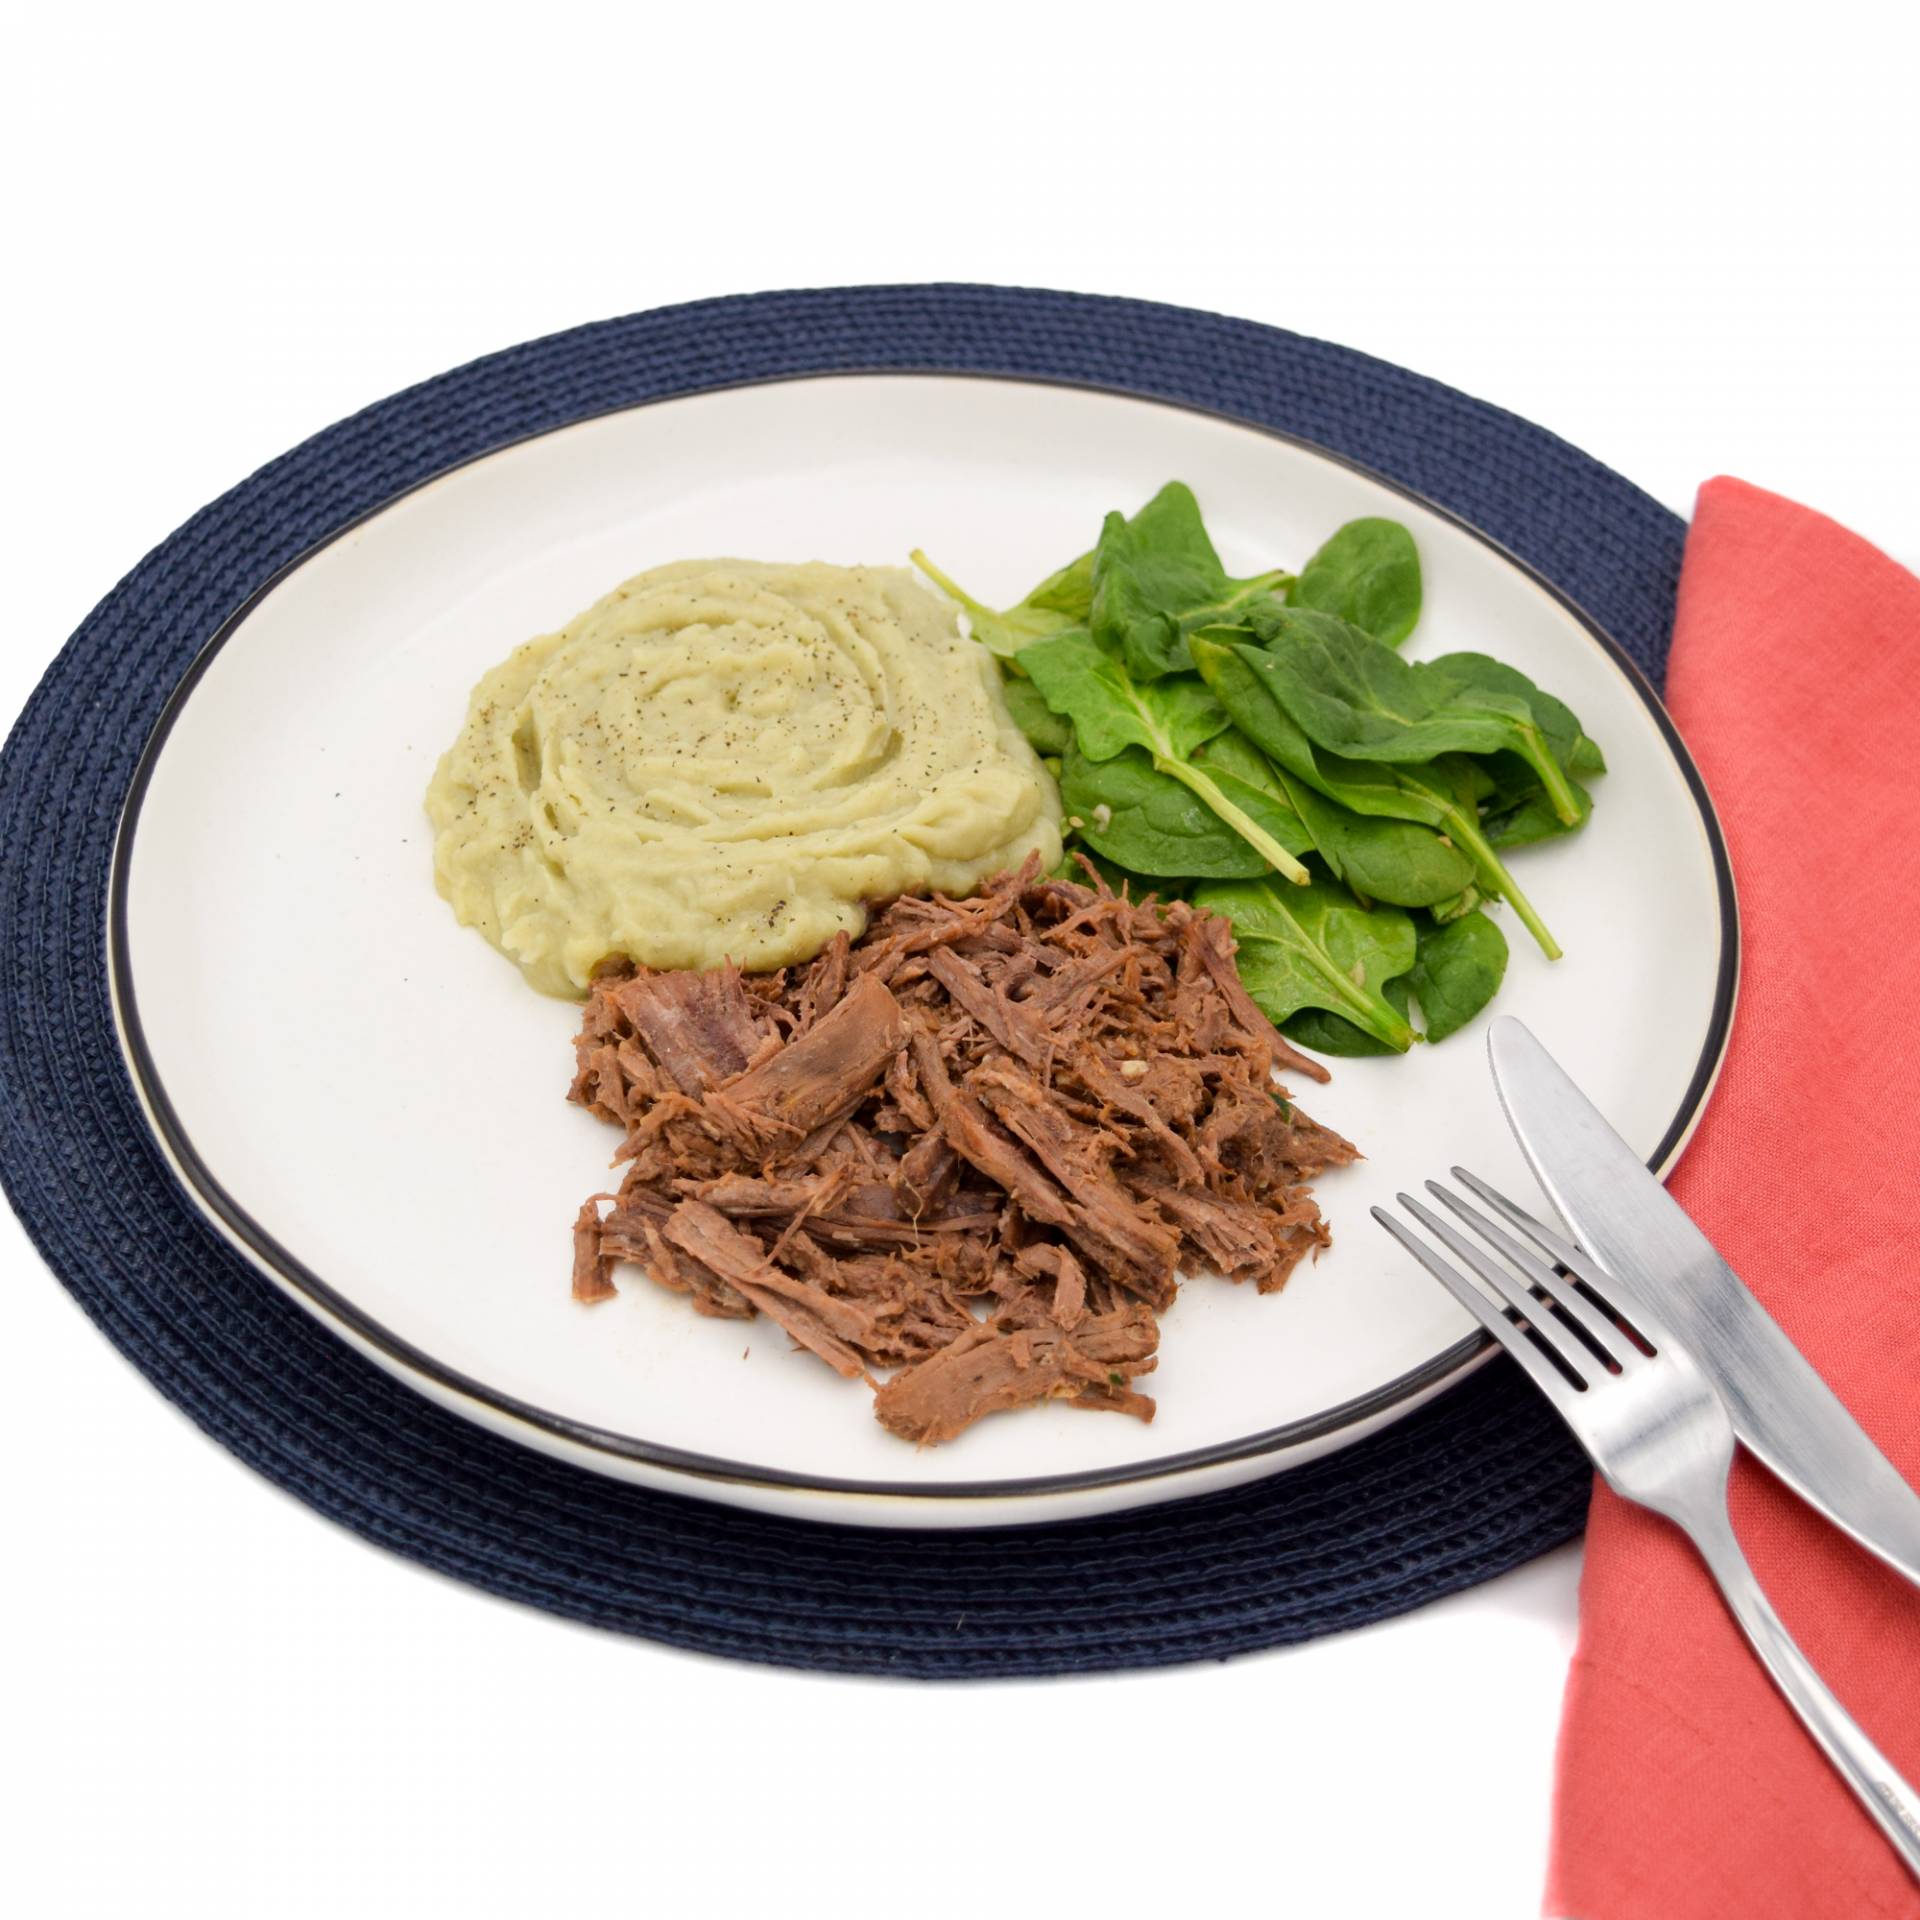 Shredded beef with mashed sweet potatoes and spinach